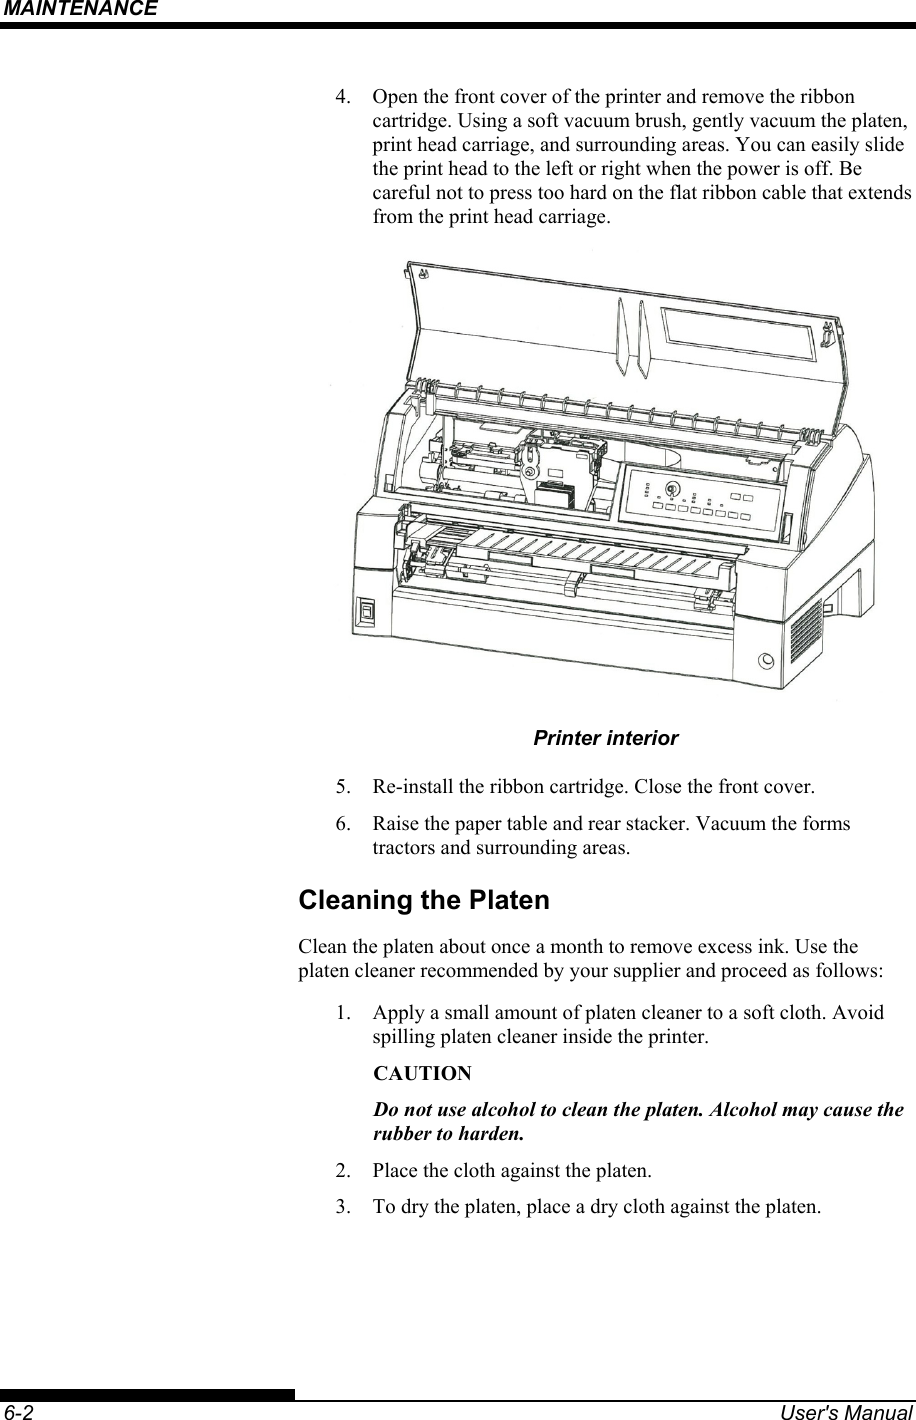 MAINTENANCE    6-2  User&apos;s Manual 4.  Open the front cover of the printer and remove the ribbon cartridge. Using a soft vacuum brush, gently vacuum the platen, print head carriage, and surrounding areas. You can easily slide the print head to the left or right when the power is off. Be careful not to press too hard on the flat ribbon cable that extends from the print head carriage.  Printer interior 5.  Re-install the ribbon cartridge. Close the front cover. 6.  Raise the paper table and rear stacker. Vacuum the forms tractors and surrounding areas. Cleaning the Platen Clean the platen about once a month to remove excess ink. Use the platen cleaner recommended by your supplier and proceed as follows: 1.  Apply a small amount of platen cleaner to a soft cloth. Avoid spilling platen cleaner inside the printer. CAUTION Do not use alcohol to clean the platen. Alcohol may cause the rubber to harden. 2.  Place the cloth against the platen. 3.  To dry the platen, place a dry cloth against the platen.  